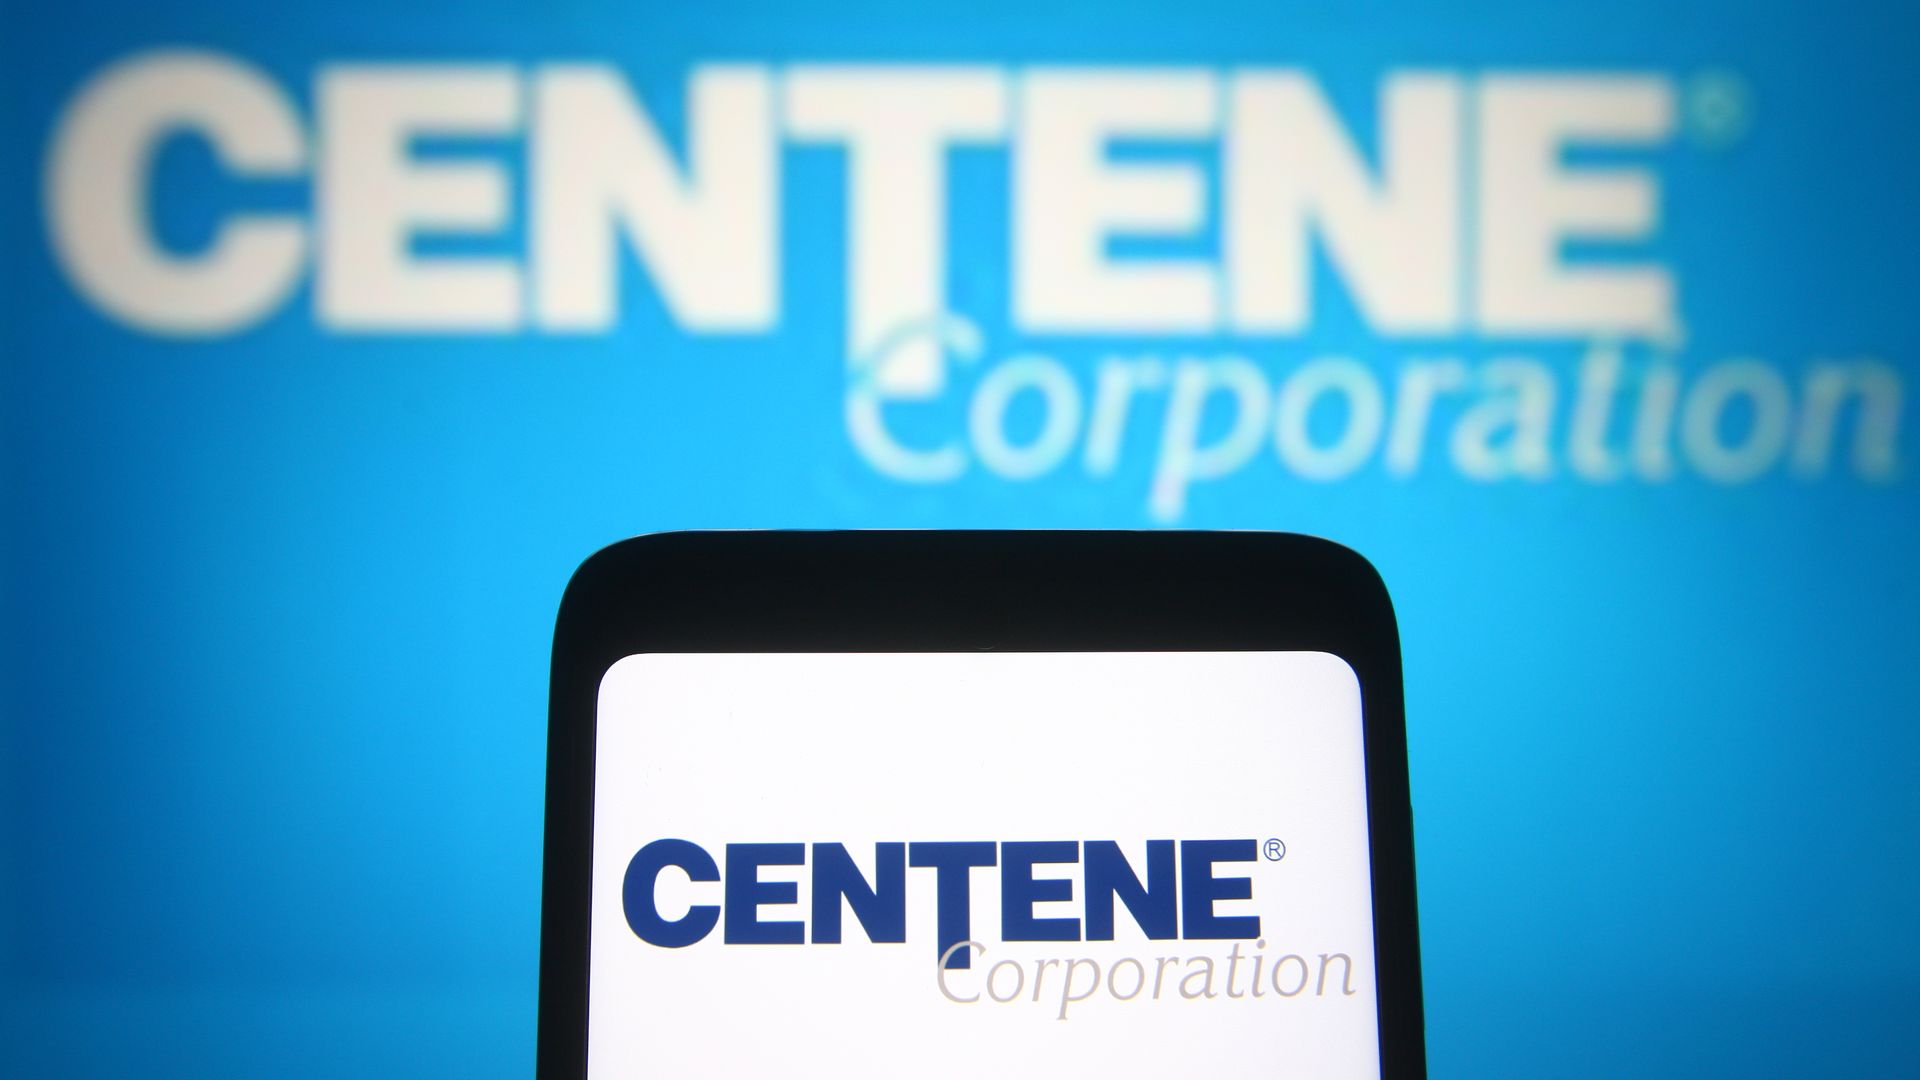 The blue Centene logo on a phone, in front of a blue background and white Centene logo.